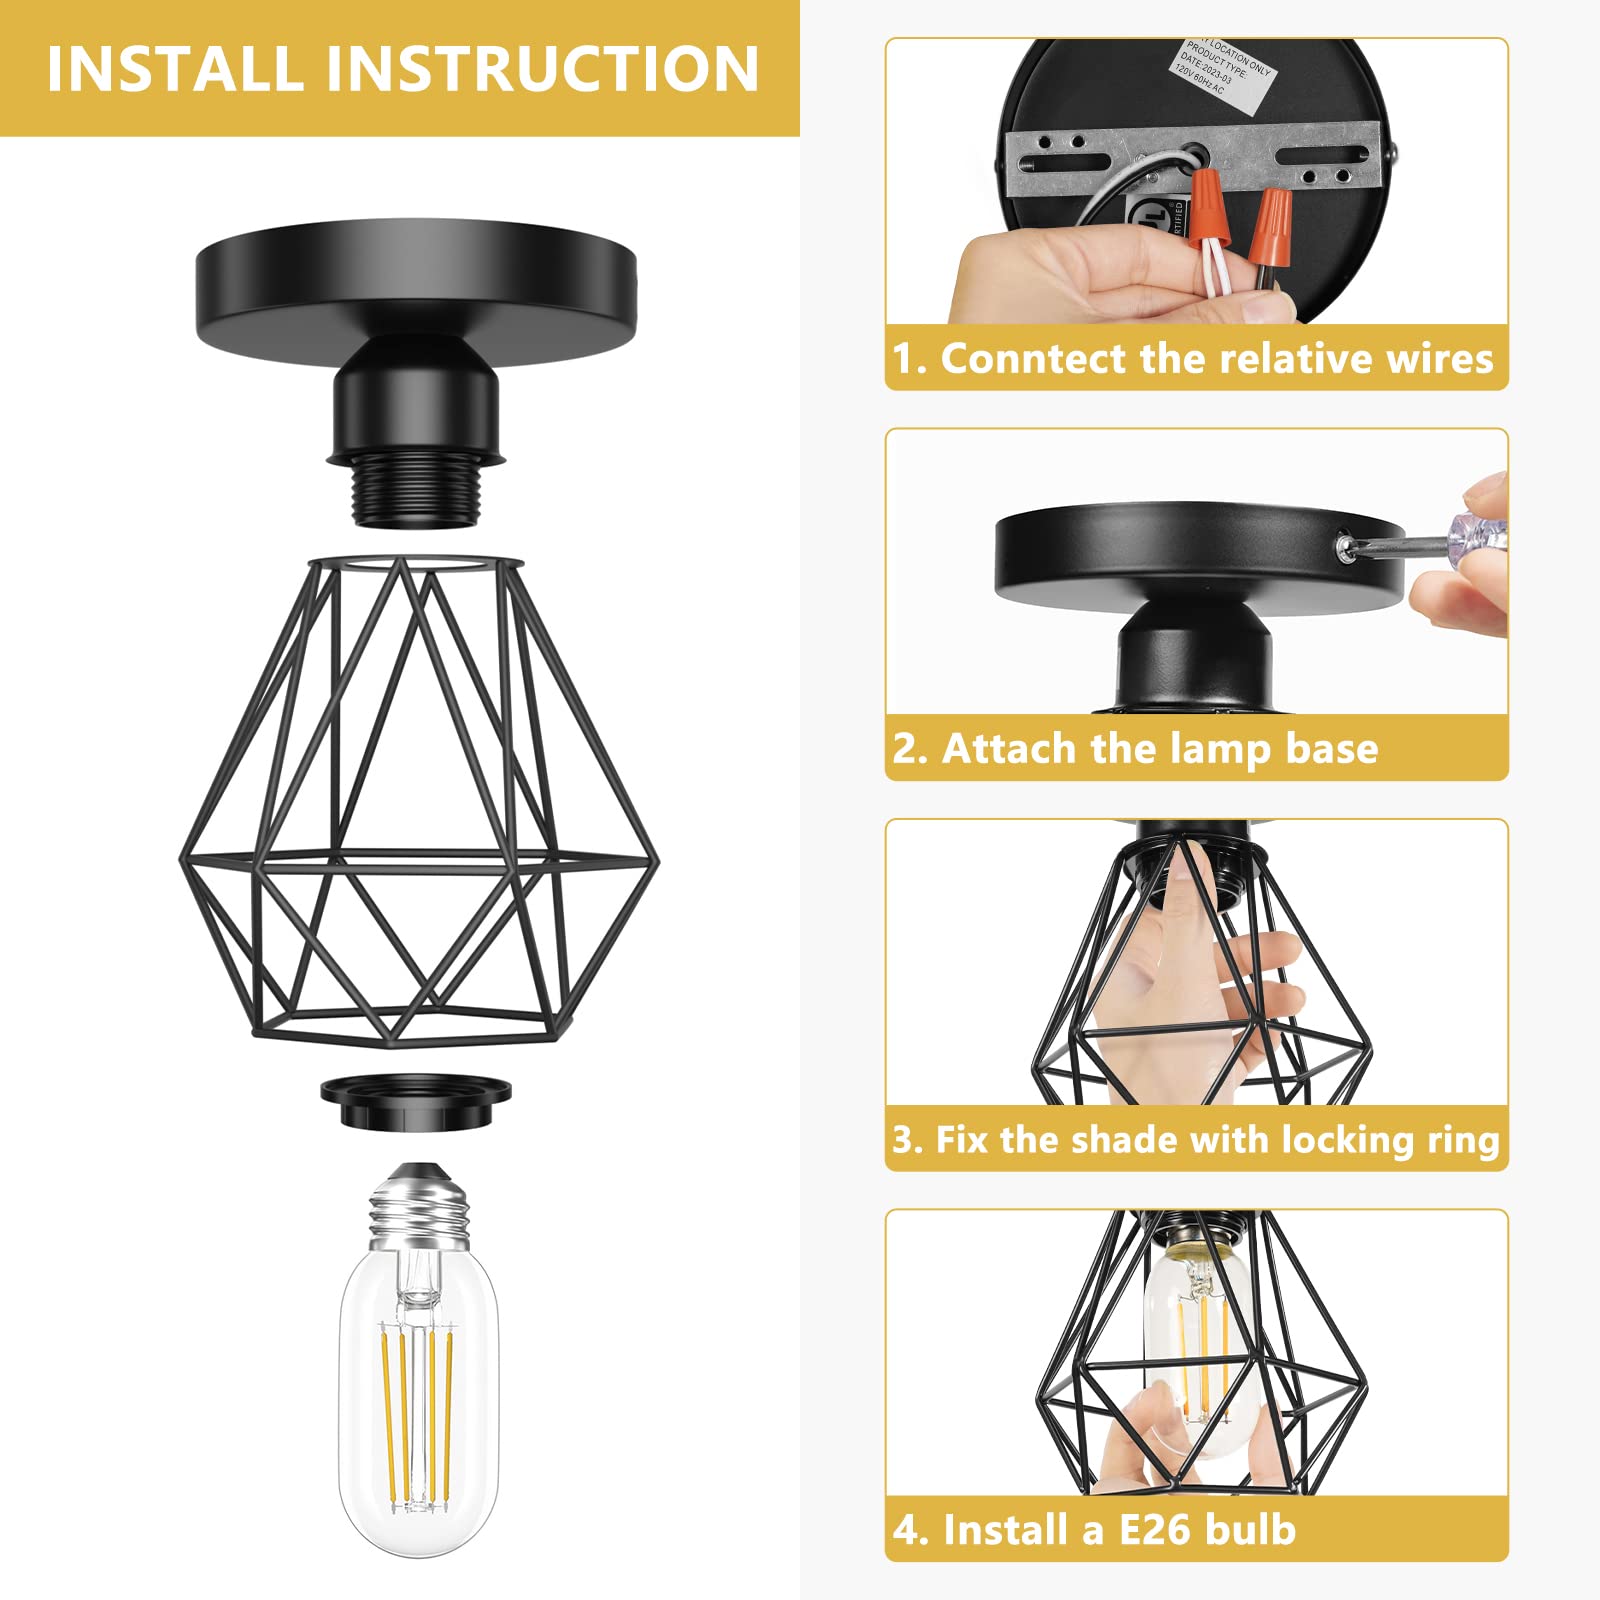 FadimiKoo 2-Pack Semi Flush Mount Ceiling Light, Black Hallway Light Fixtures Ceiling Mount, Farmhouse Metal Cage Pendant Indoor Modern Ceiling Lamp for Kitchen Porch Bedroom (LED Bulbs Included)